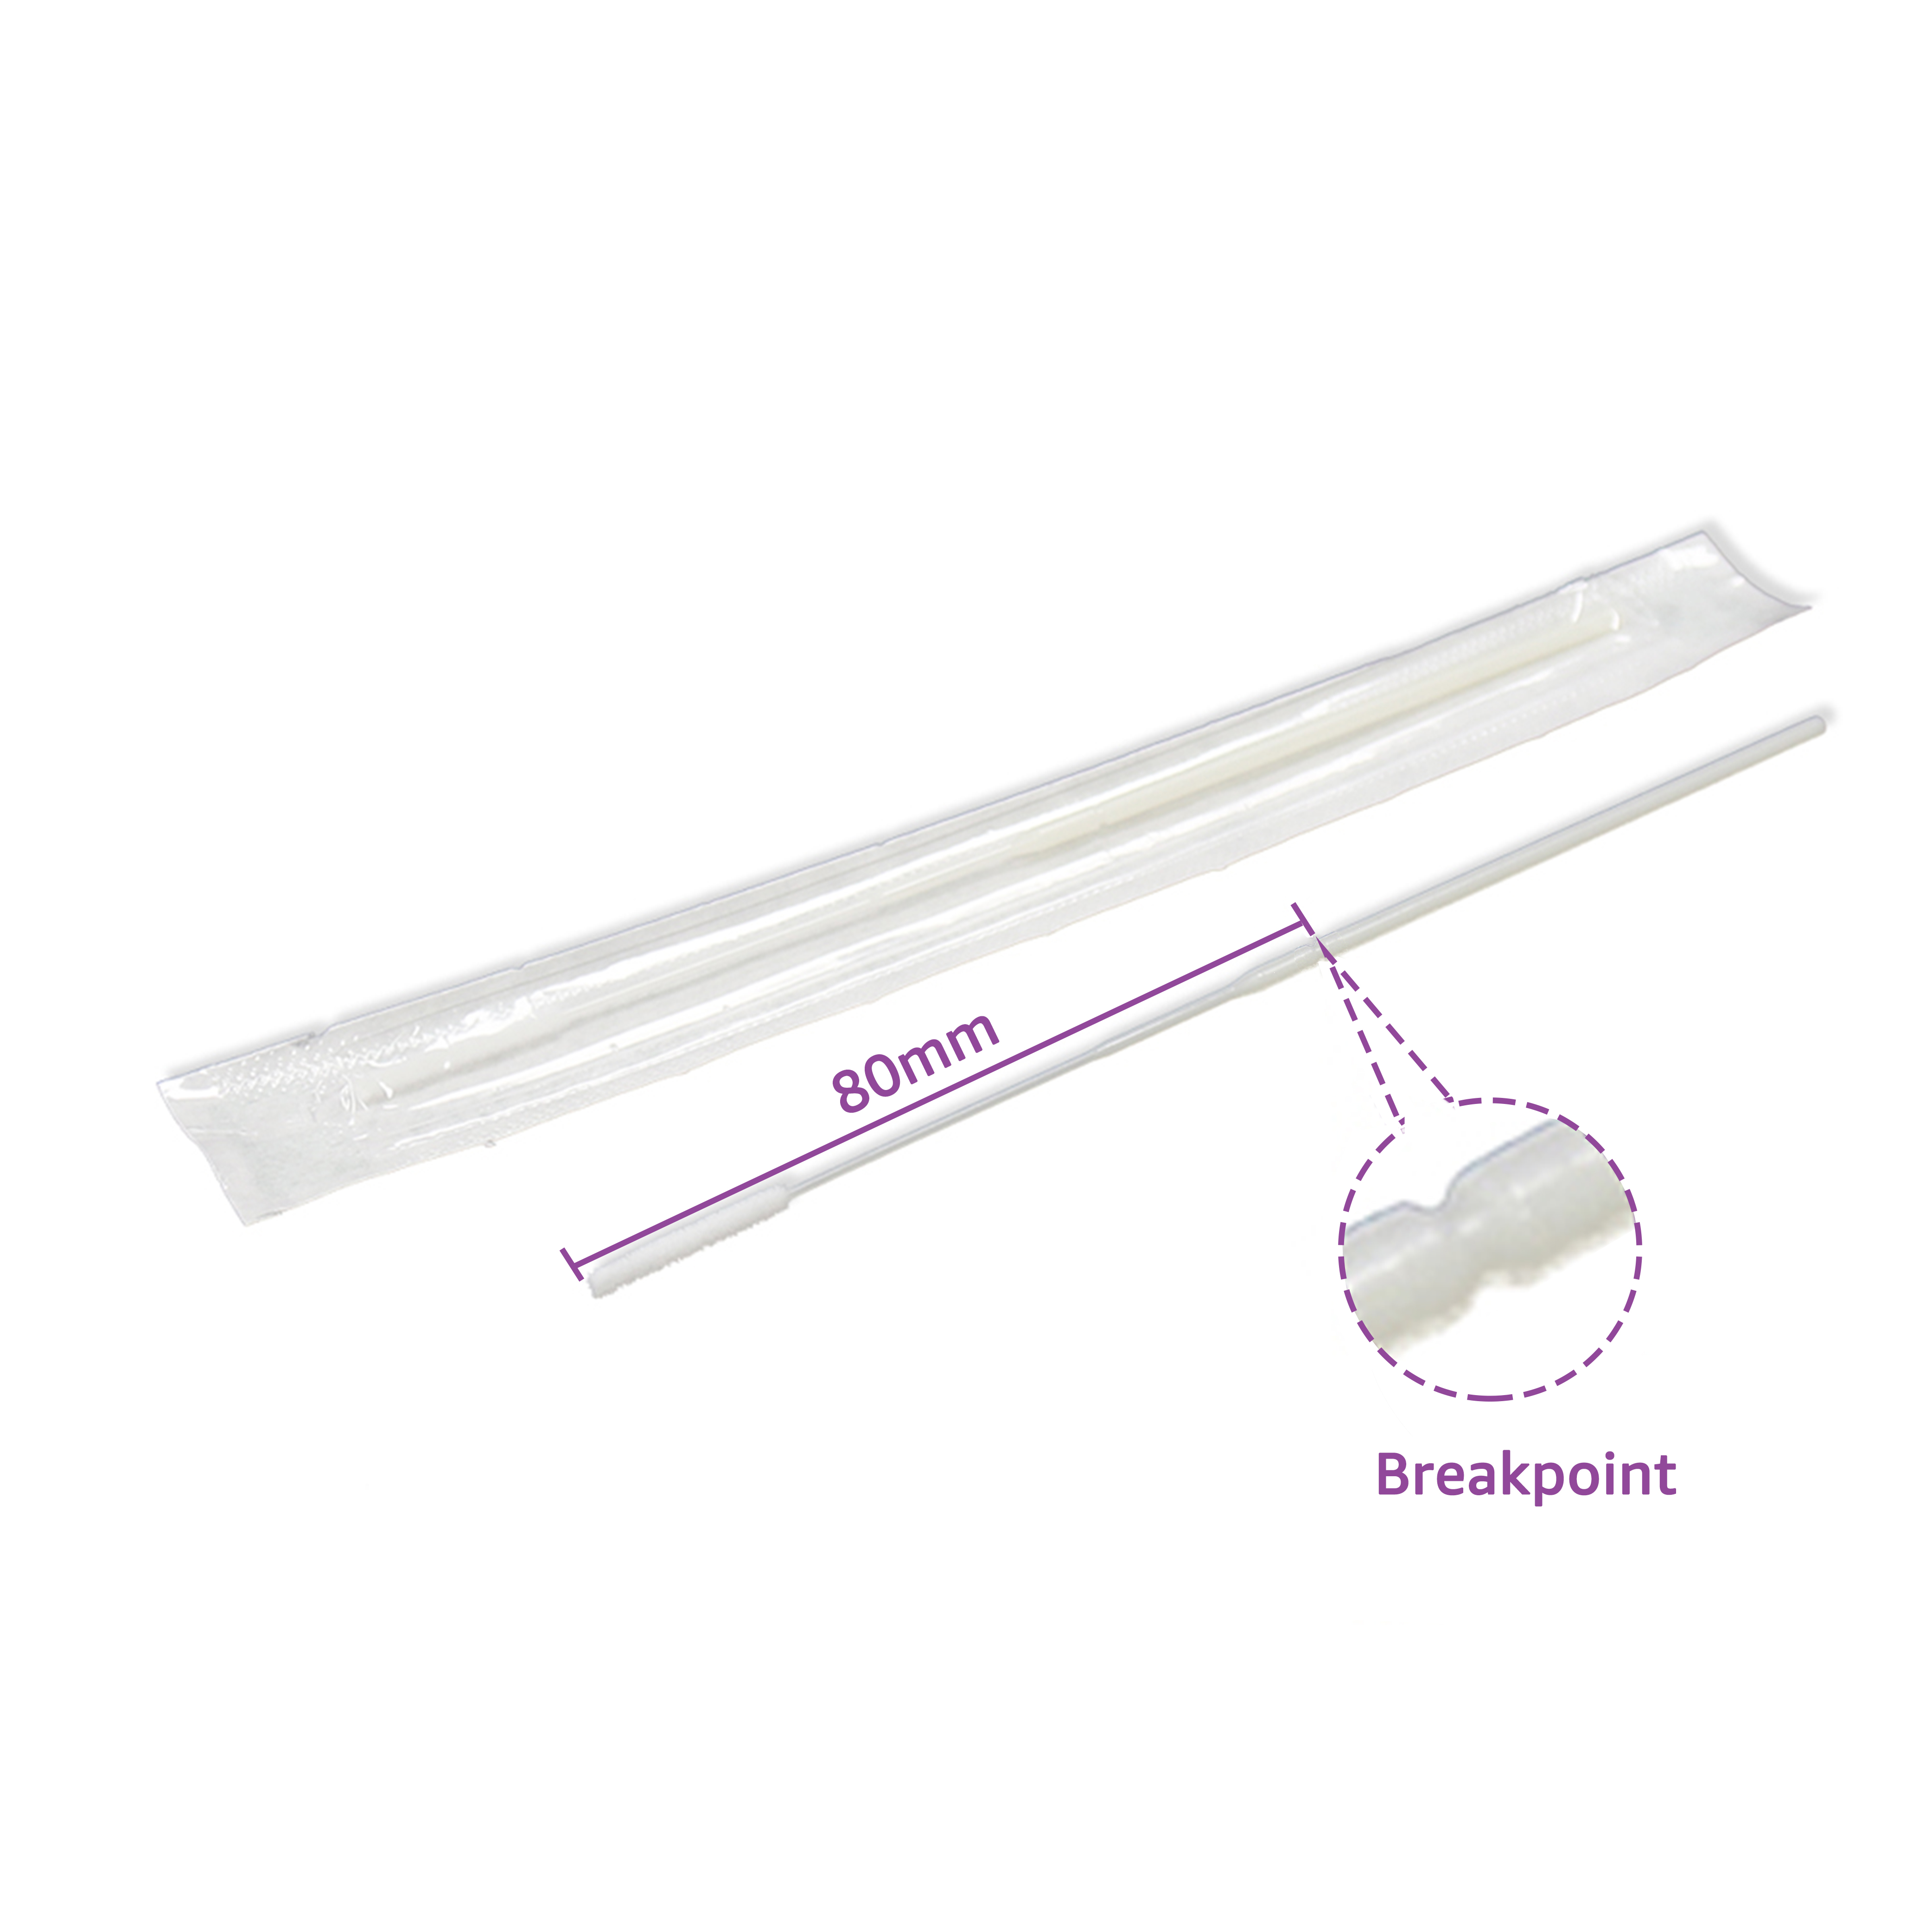 Maccx 6" Length Nylon Tipped Collection Swabs with 3.15" (80mm) Breakpoint, Used for Nasopharyngeal Sample Collection, Pack of 500, NFS080-500